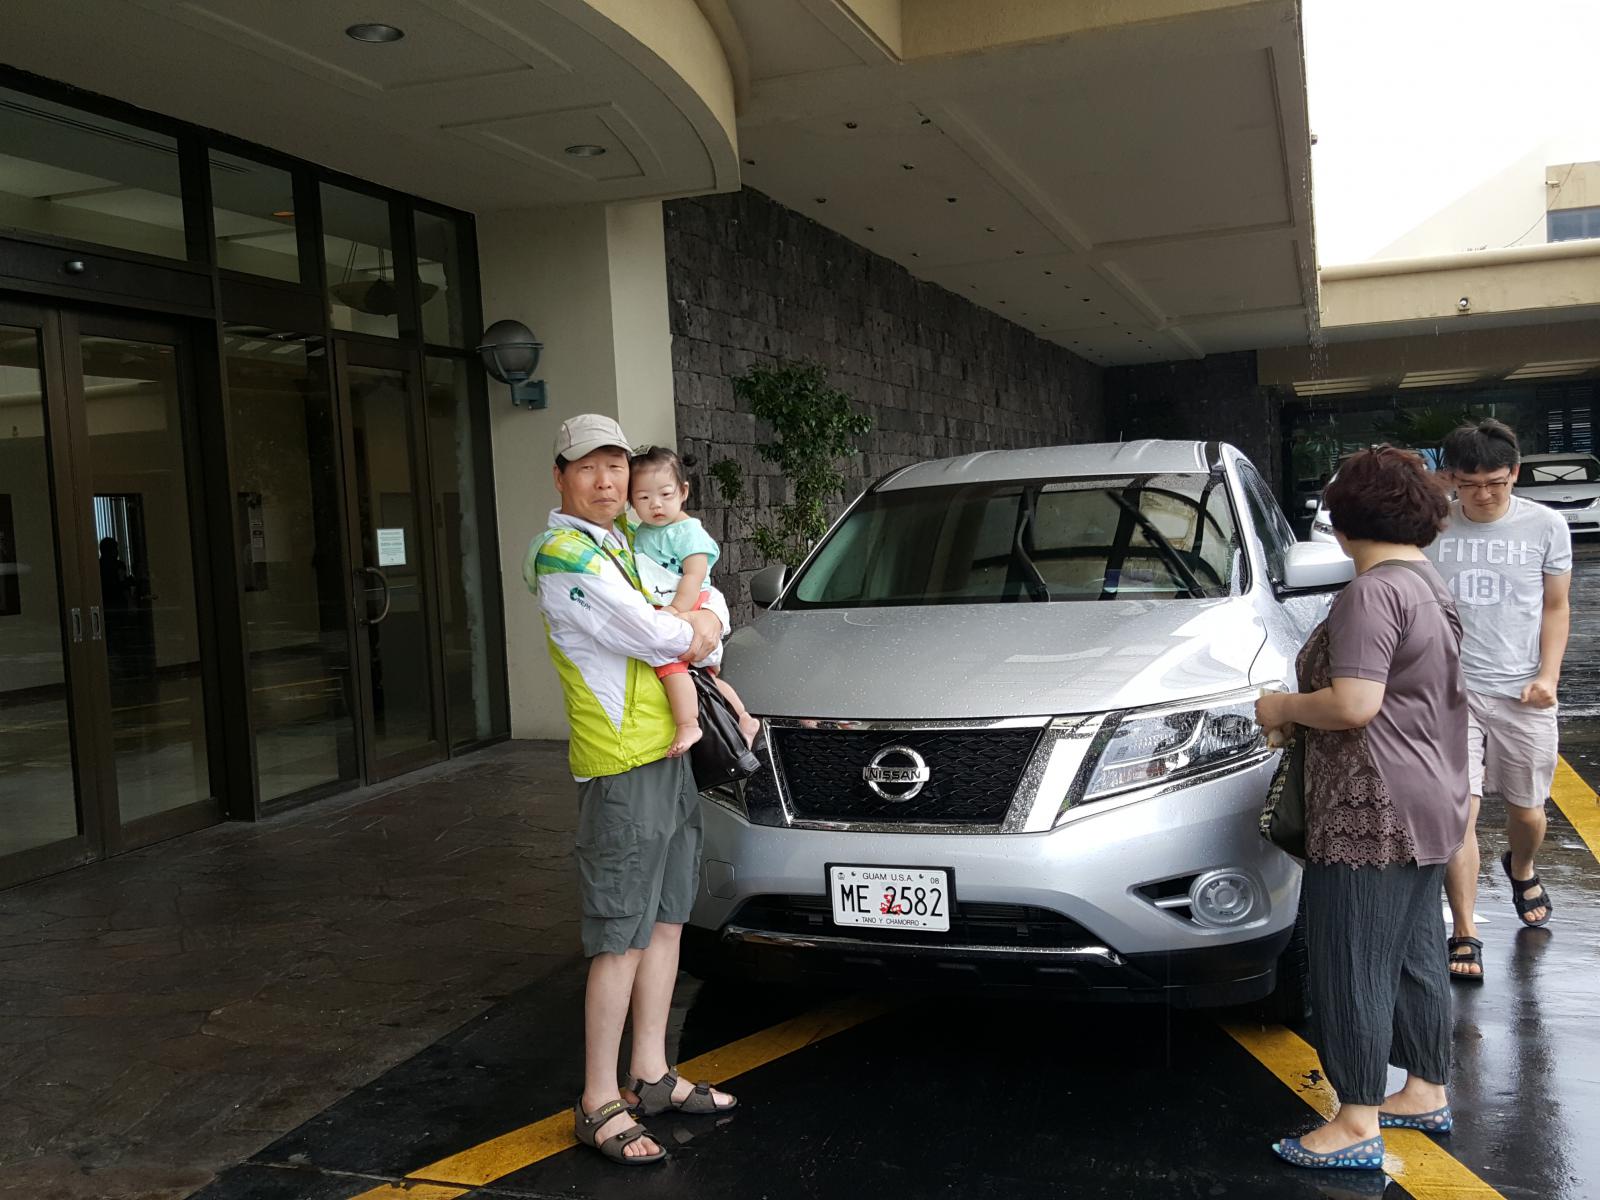 I used Nissan car hire his former mother sixty to commemorate the trip. Haetguyo even easier to use than what a new car called the vehicle was spacious and clean and a good base to explore Trang doljaengyi sweetheart